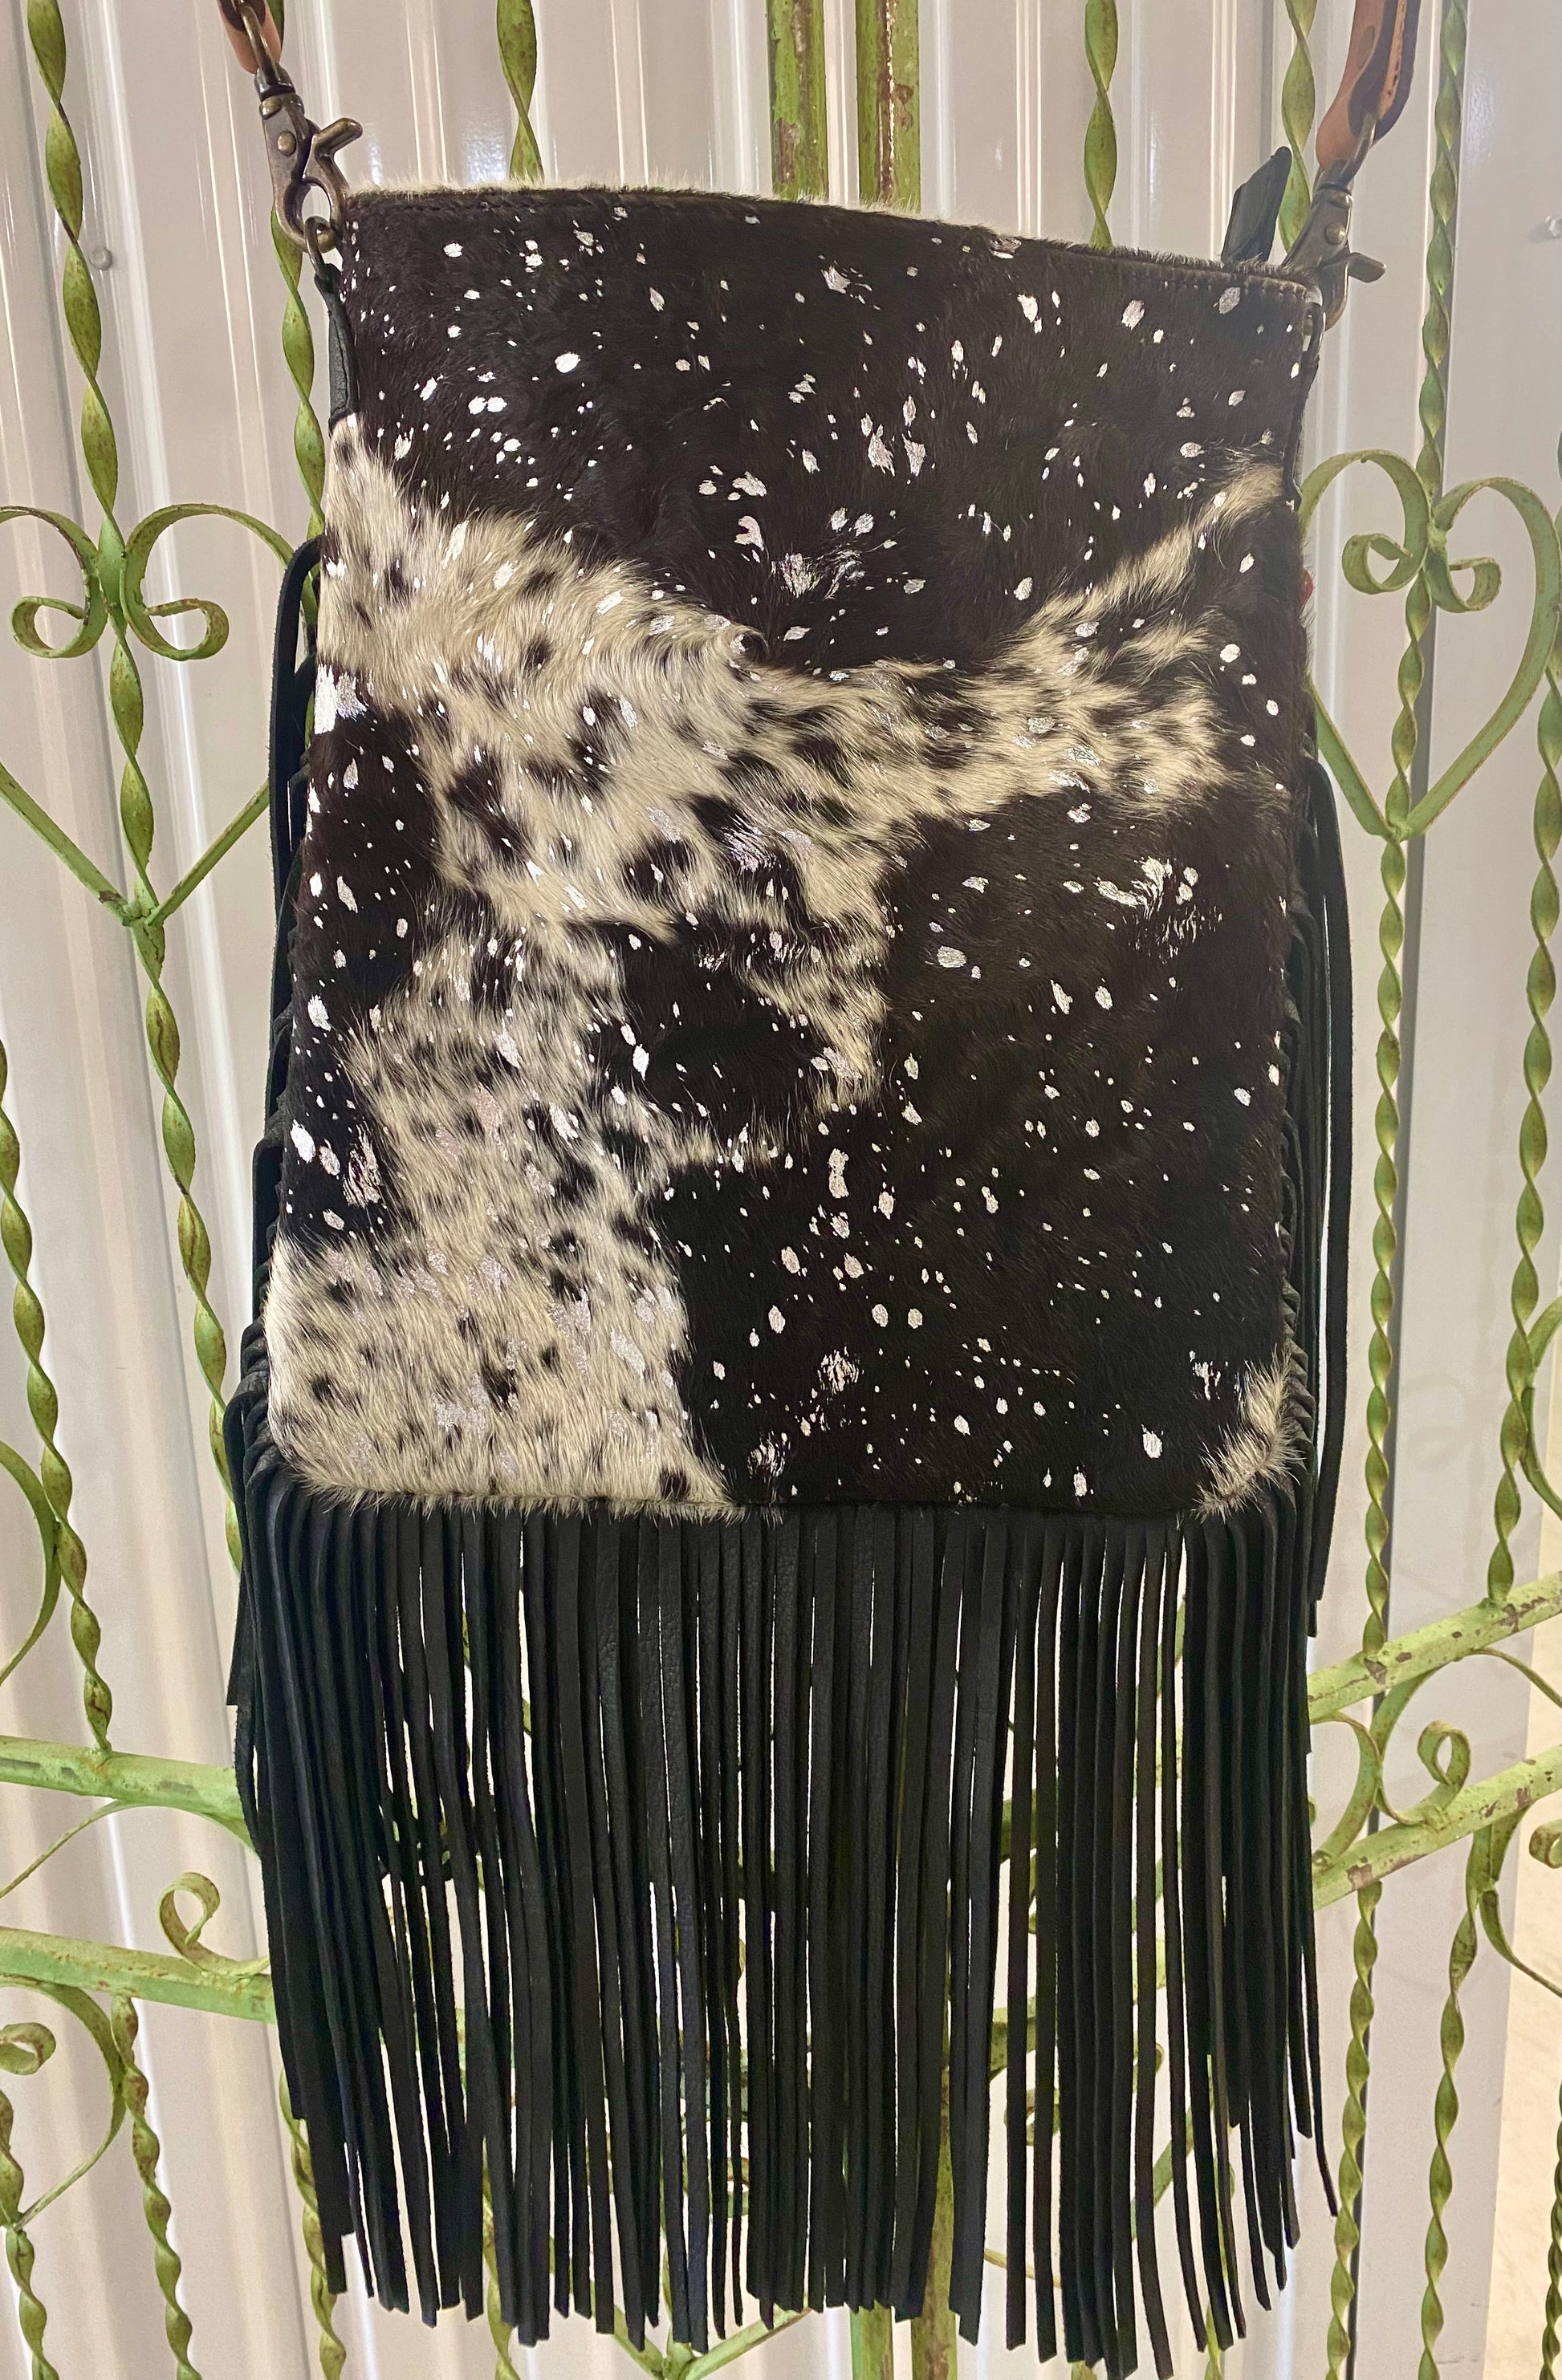 Large Black and White American Darling Western Crossbody Fringe Purse If you like cowhide and fringe and you're looking for a really cute crossbody purse that is also concealed carry, we've got just the purse for you!  The Alex crossbody fringe purse is accented with silver metallic spots across the black and white hair on hide cowhide. It also has a removable tooled leather shoulder strap. It features 2 open pockets and 1 zipped pocket inside.